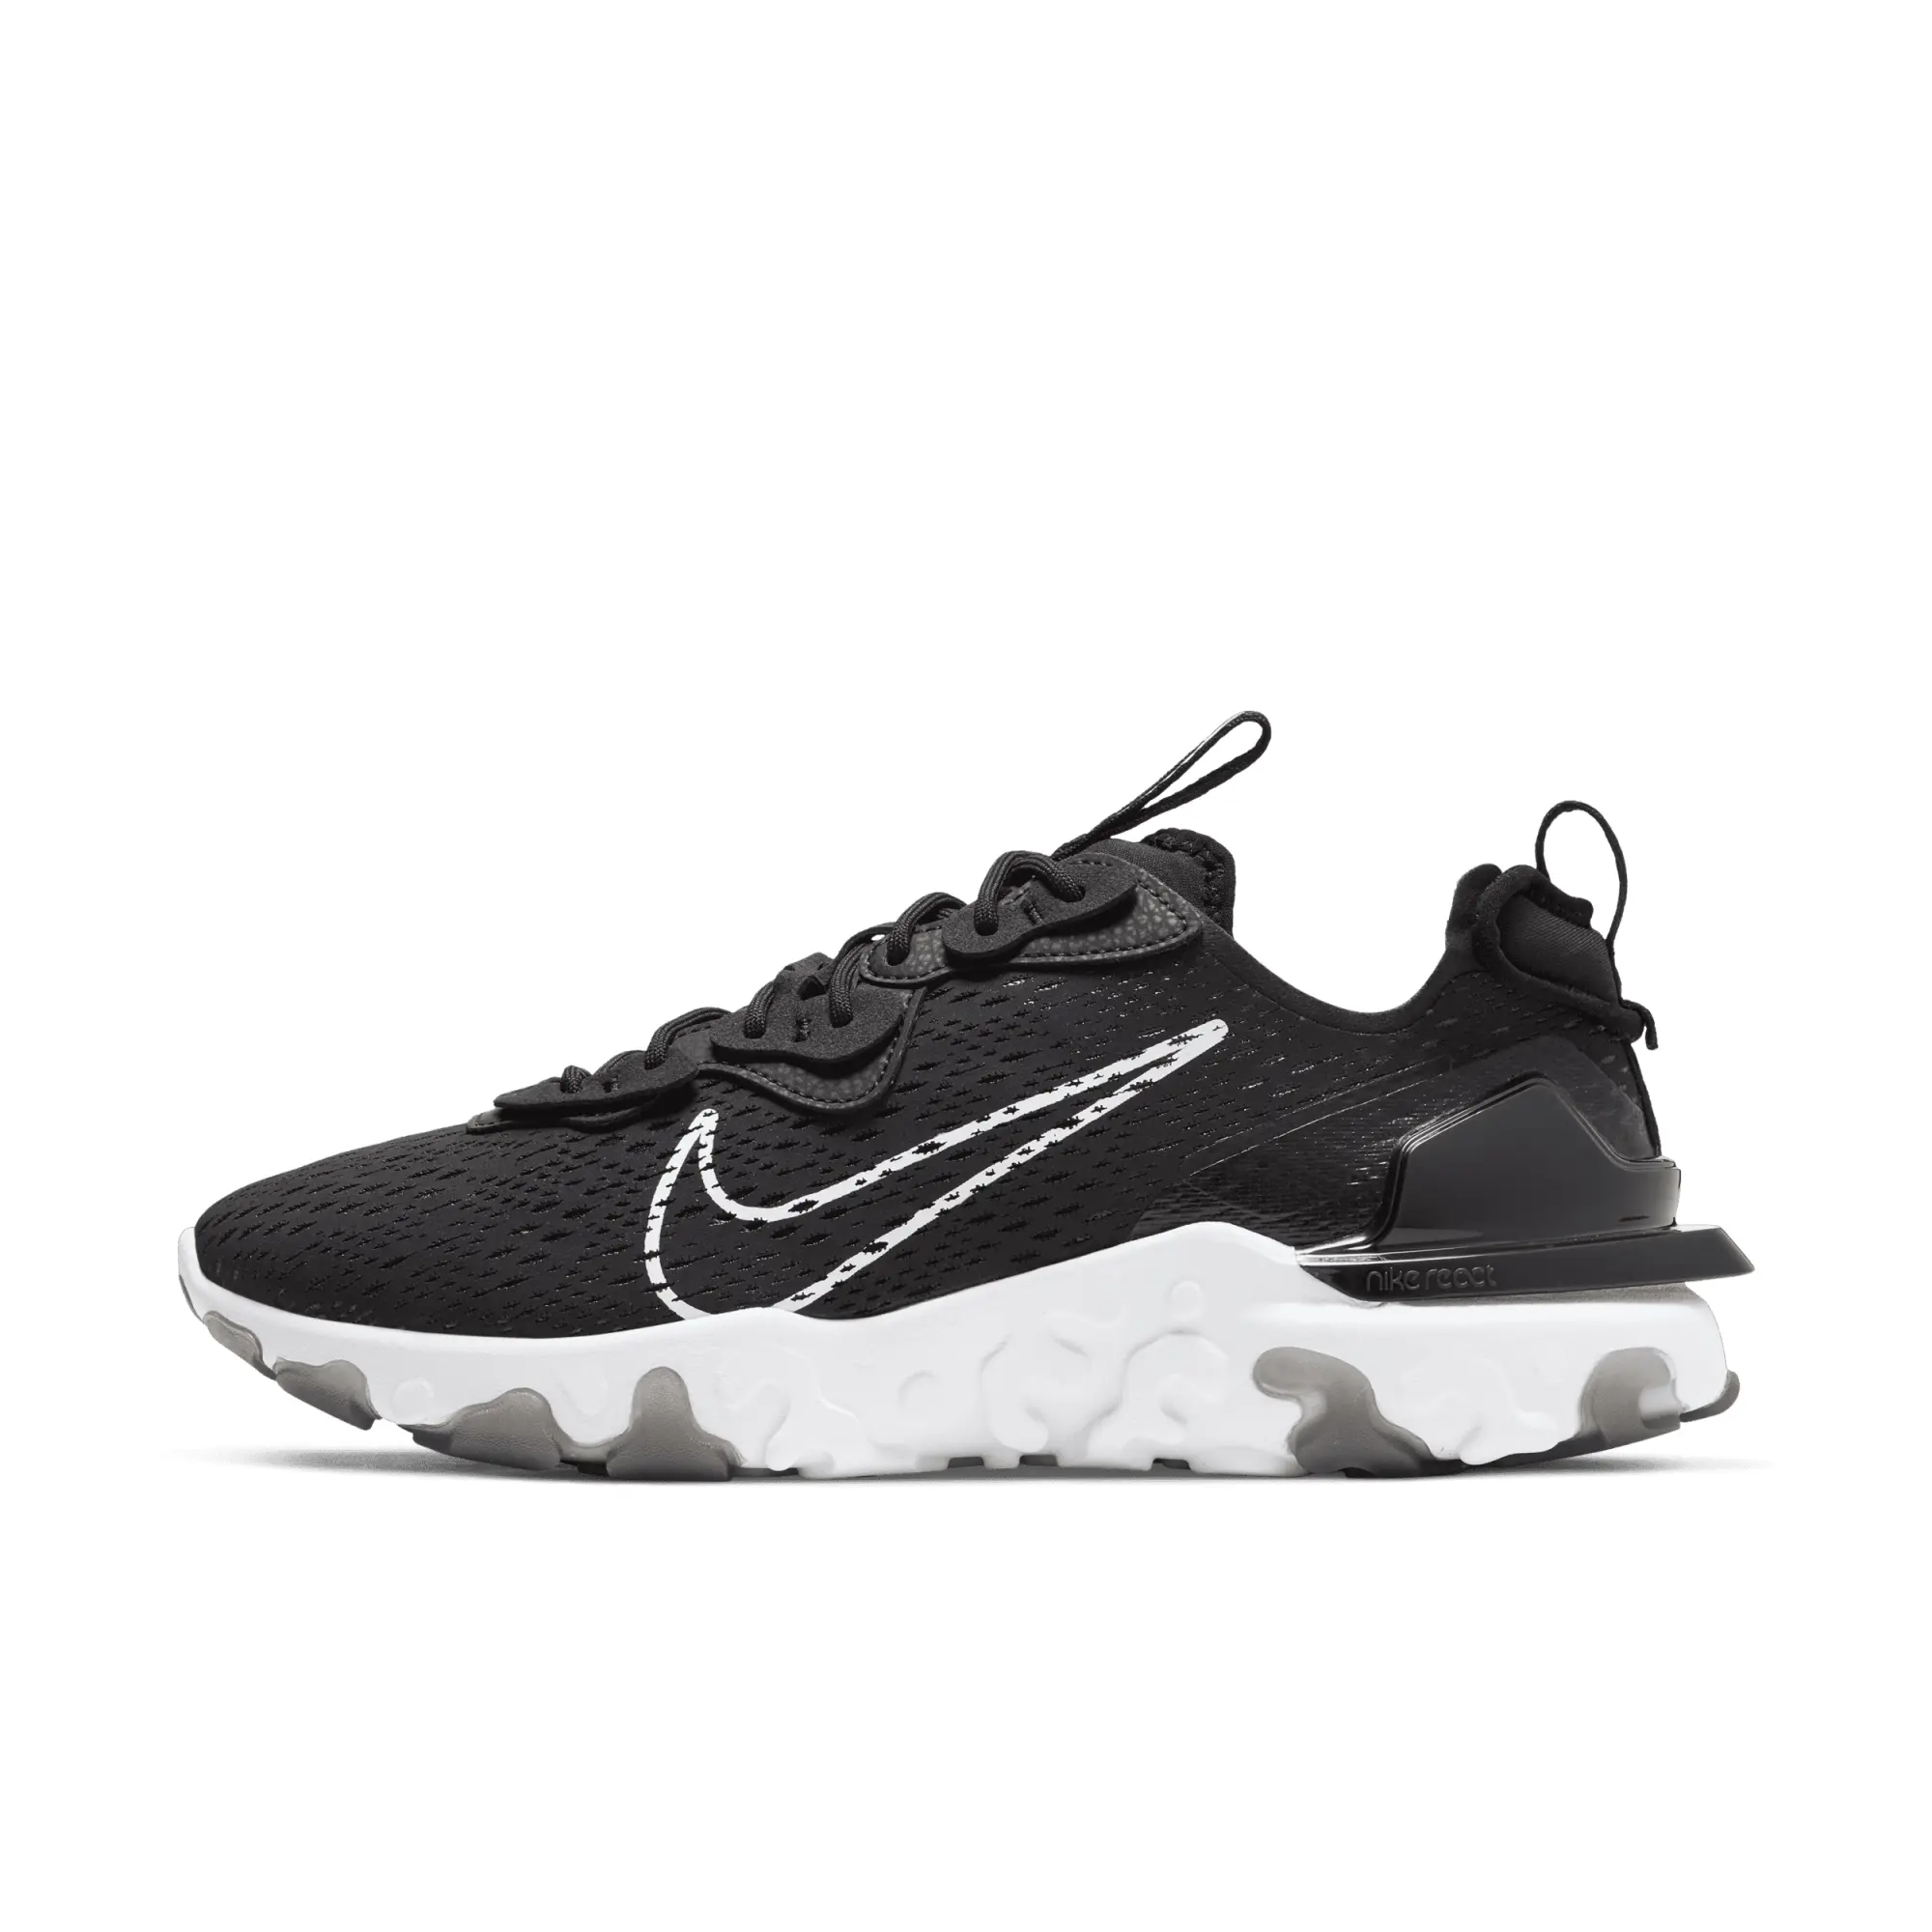 Nike react vision trainers in black & white